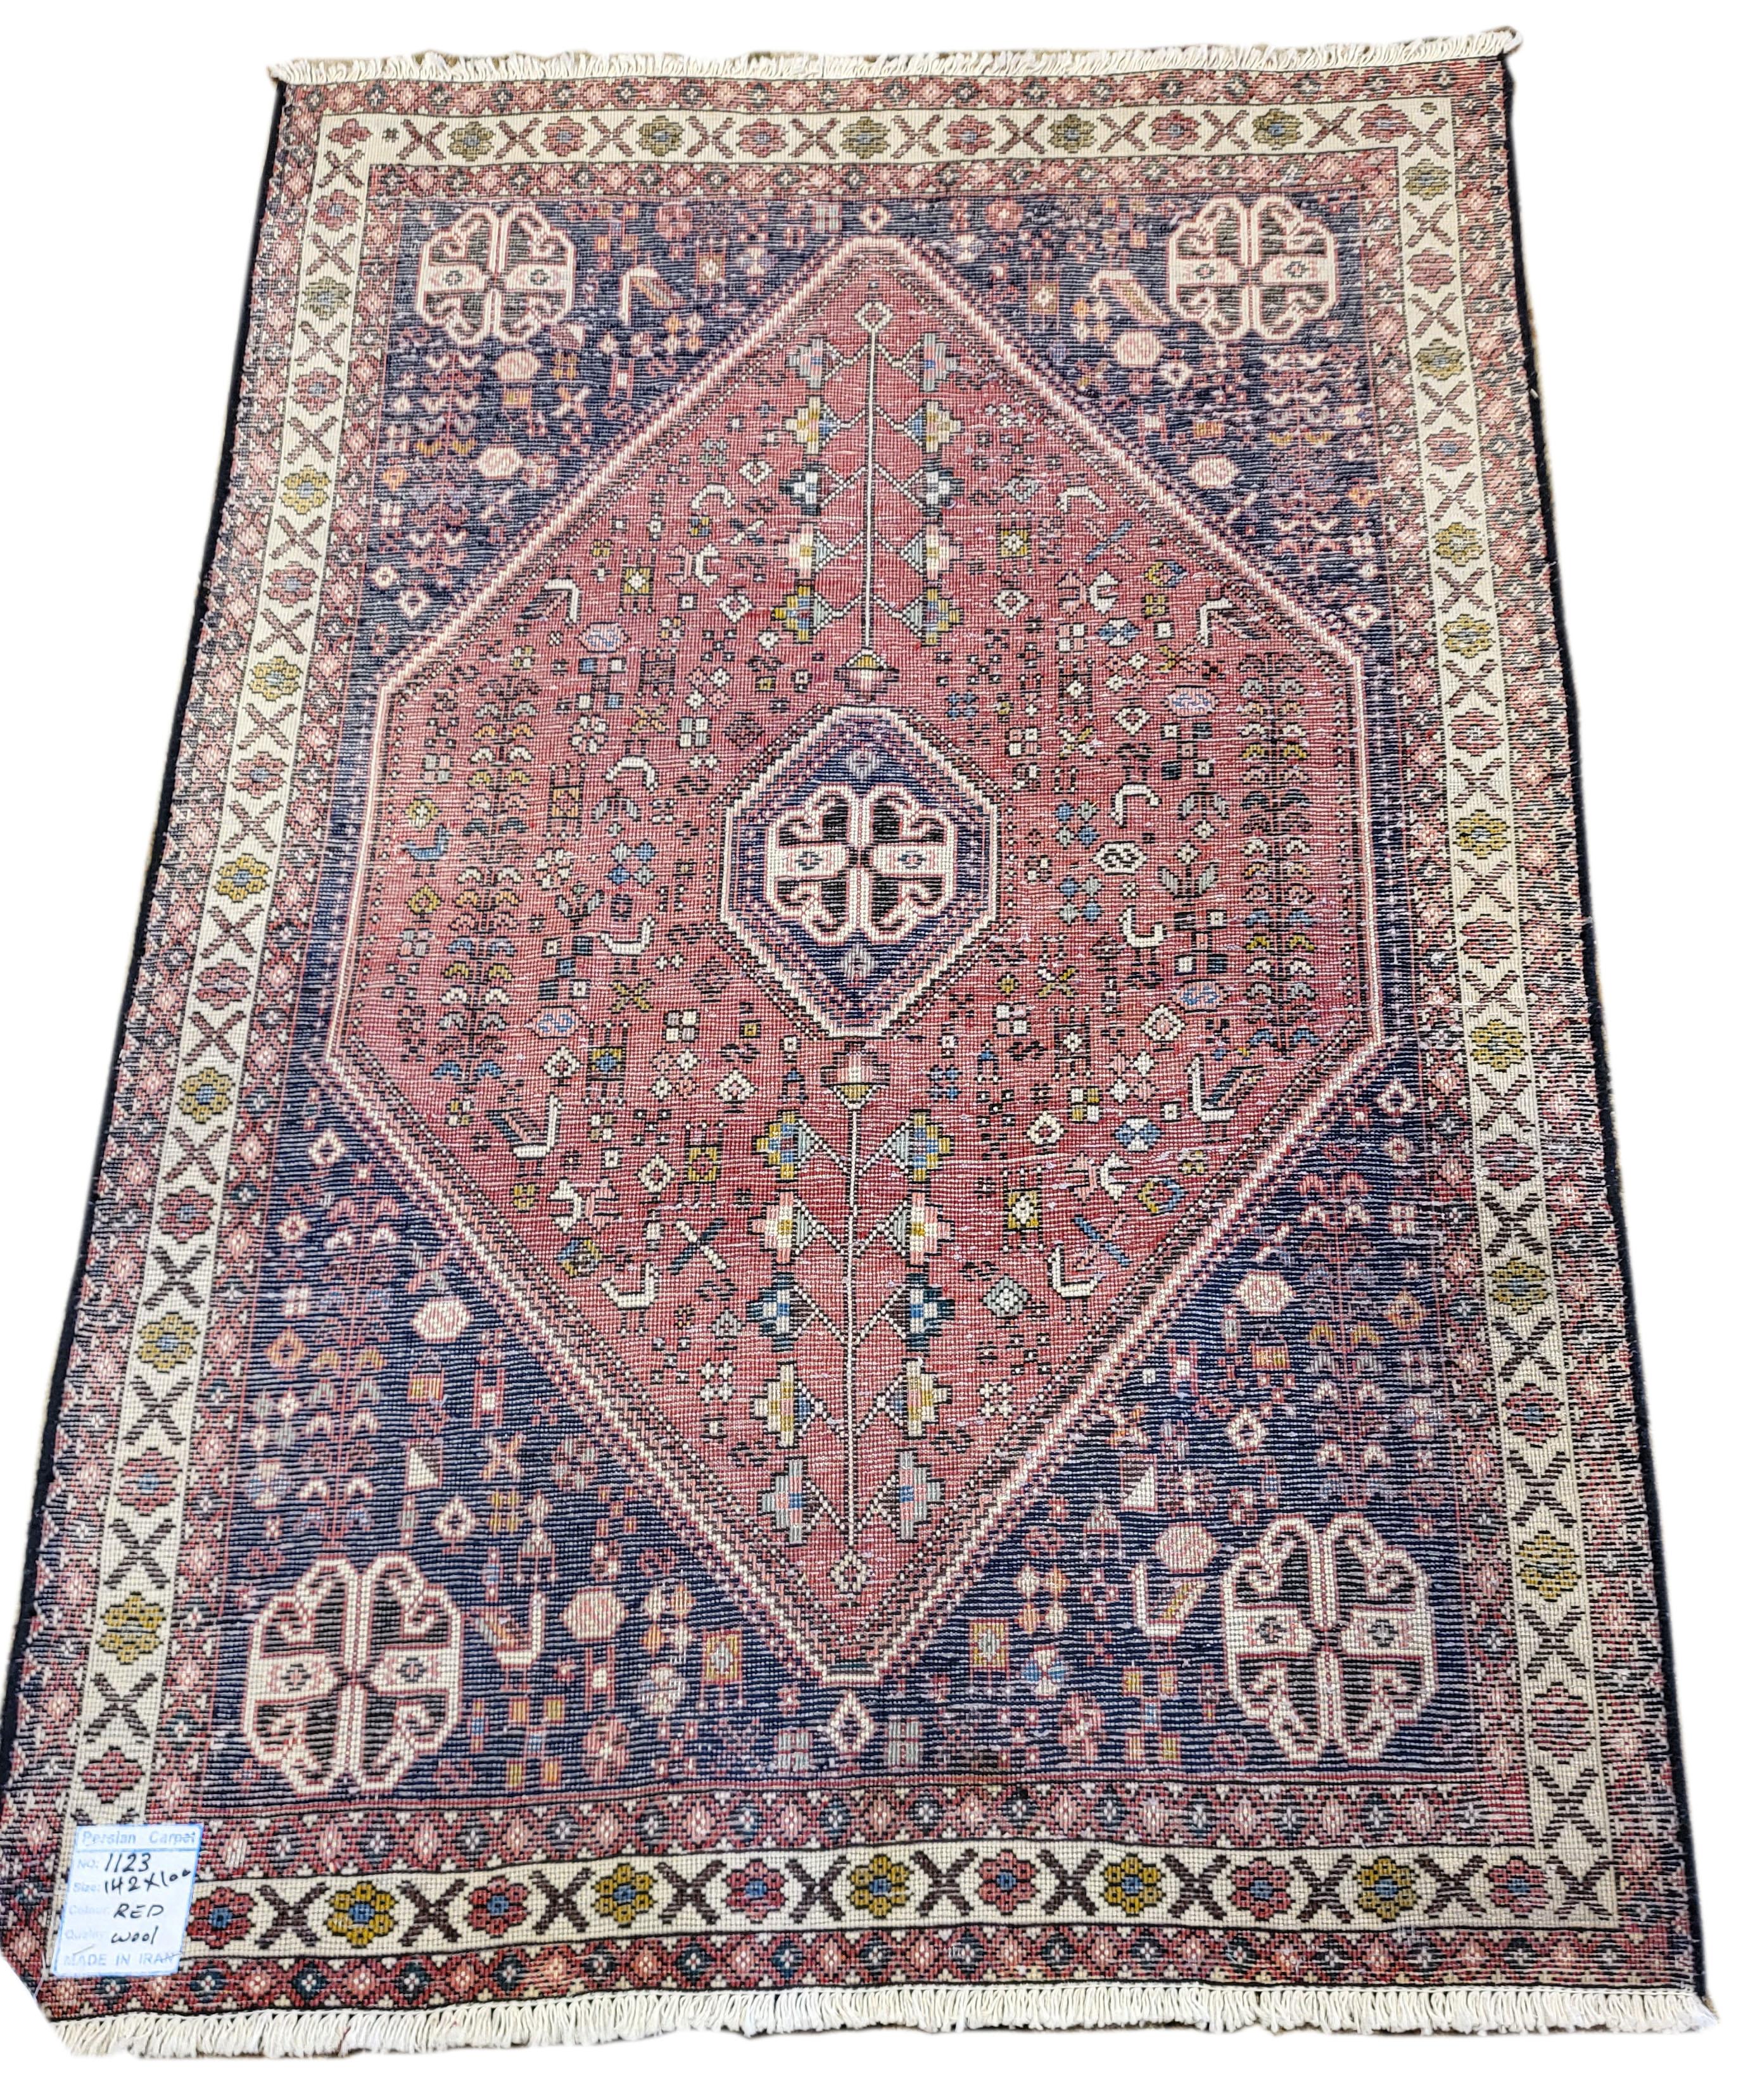 Impeccable 60's Persian Abadeh. This piece seems to be untouched by time and looks as good as it did when it was first woven in the 60's! This piece is incredibly rich in motifs and is masterfully woven. Such a clean design and fine weave are the by